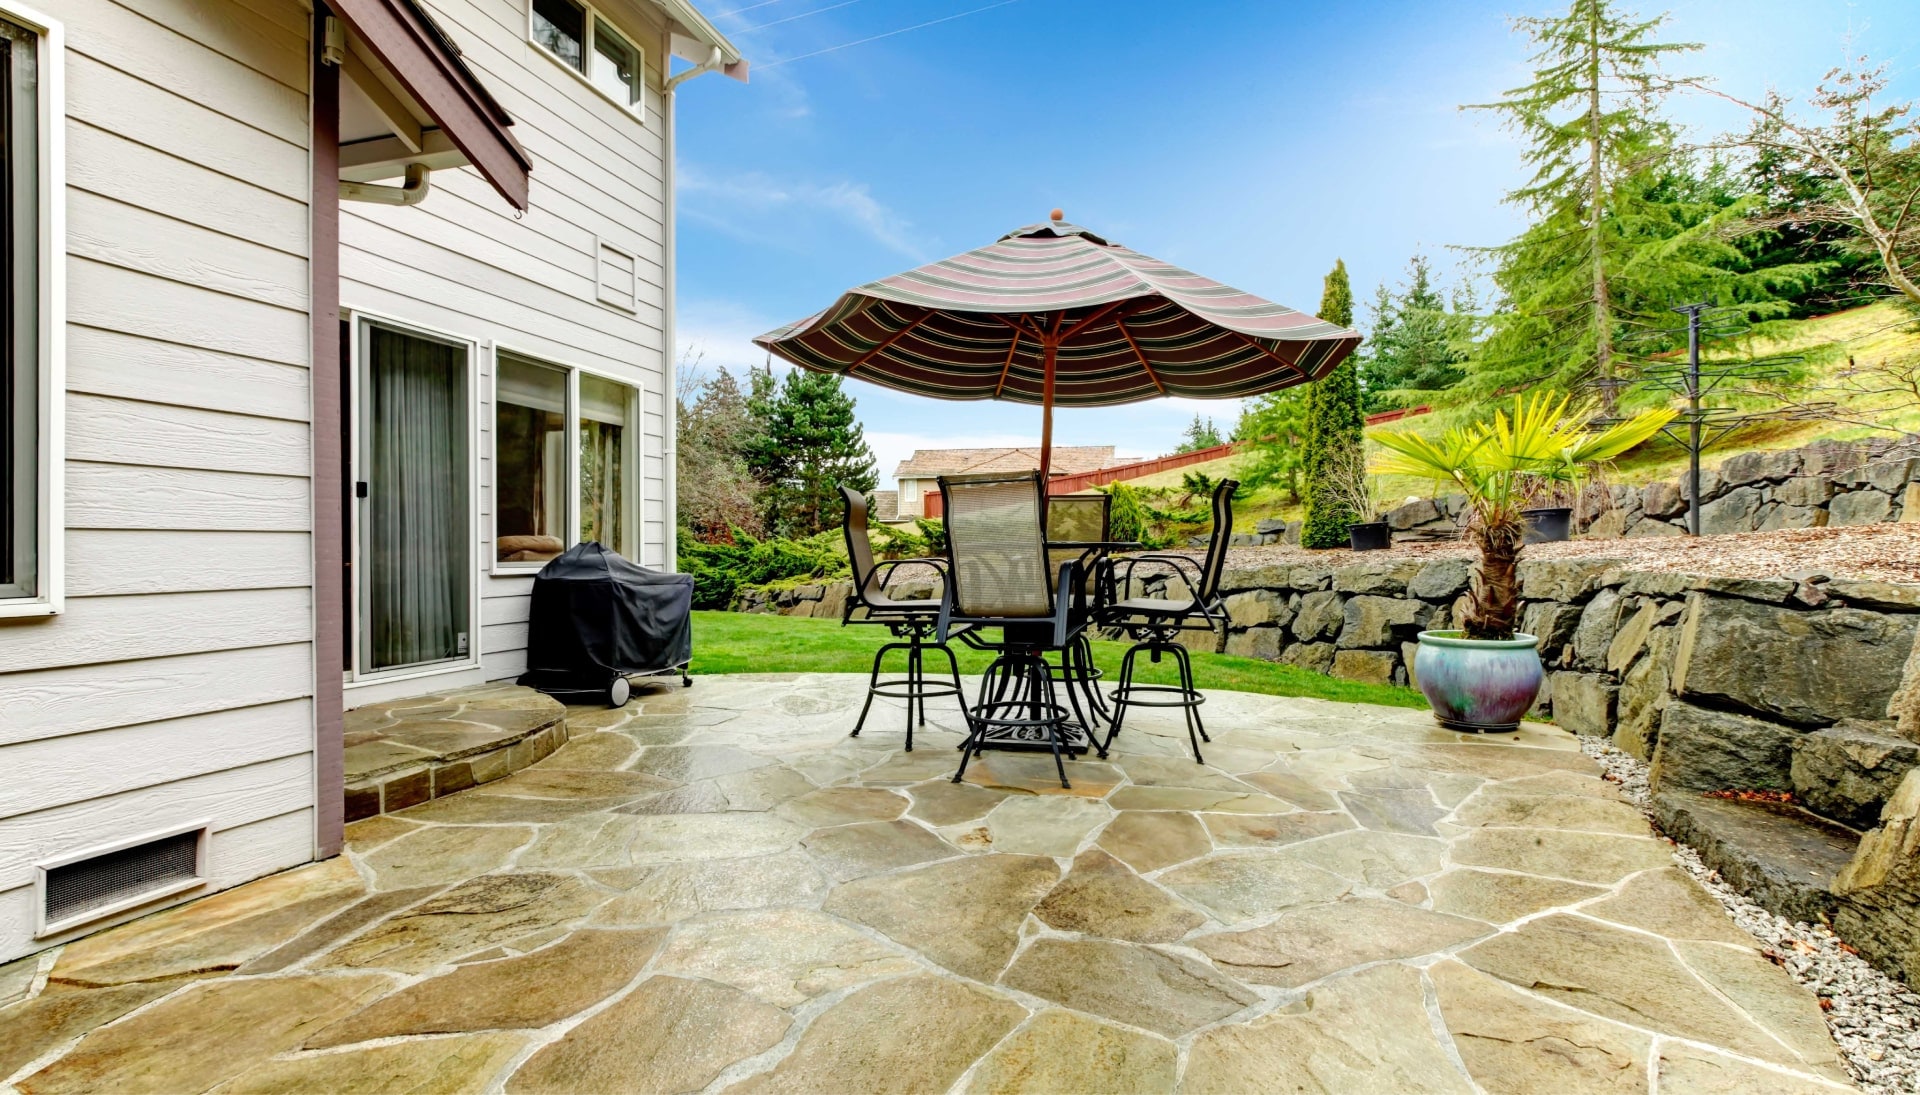 Beautifully Textured and Patterned Concrete Patios in Medford, OR